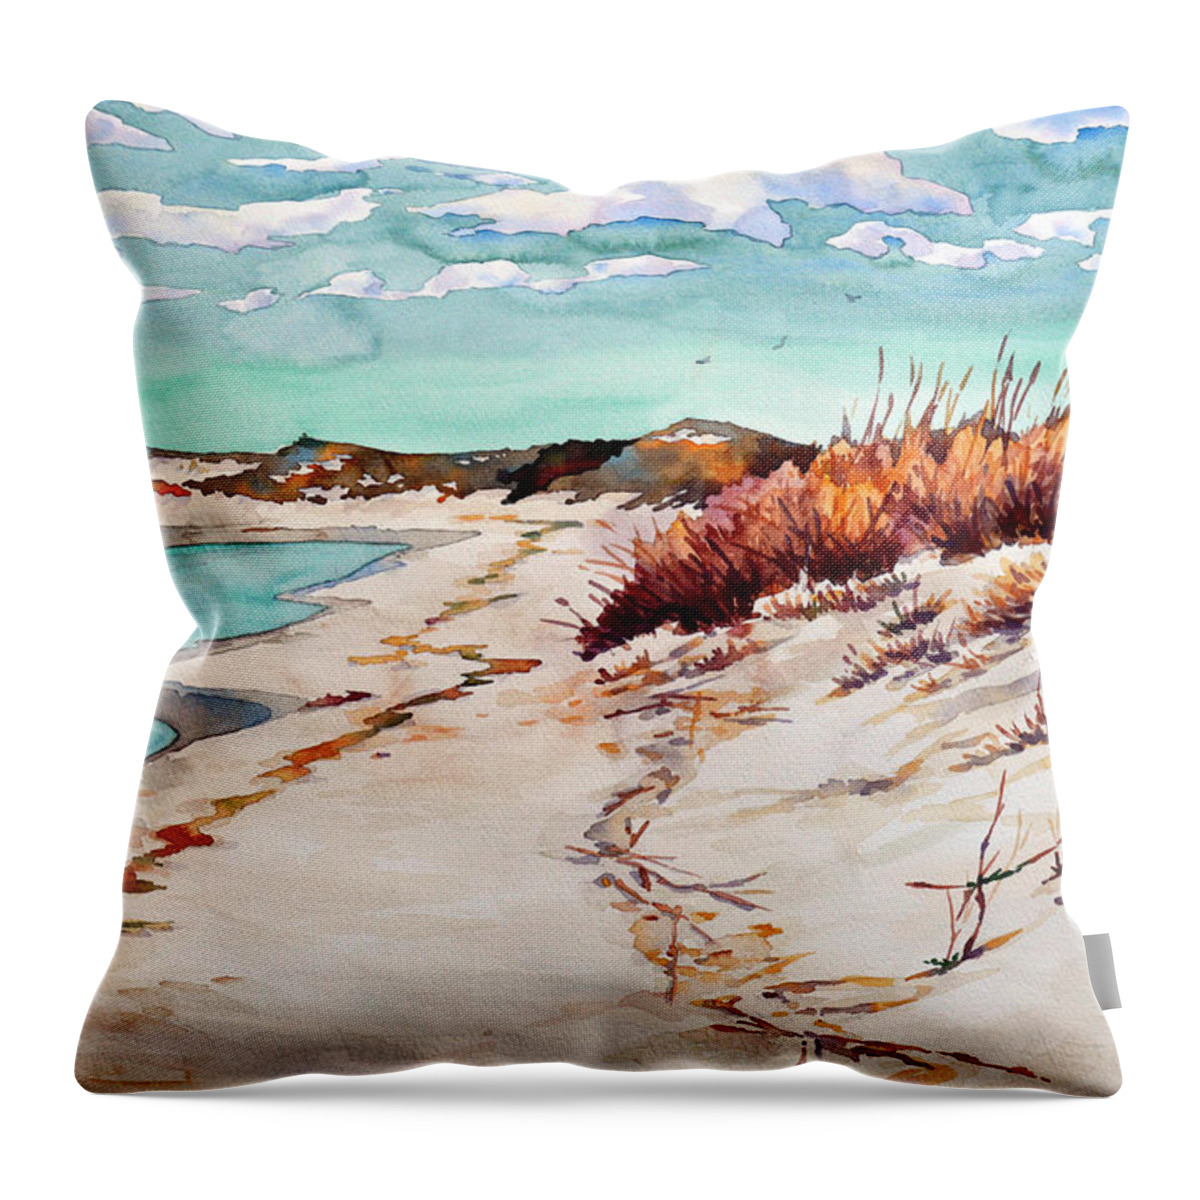 #water #beach #sawgrass #winter #capehenlopen #delawarebeaches #delawarestateparks #landscape Throw Pillow featuring the painting Winter Sands by Mick Williams